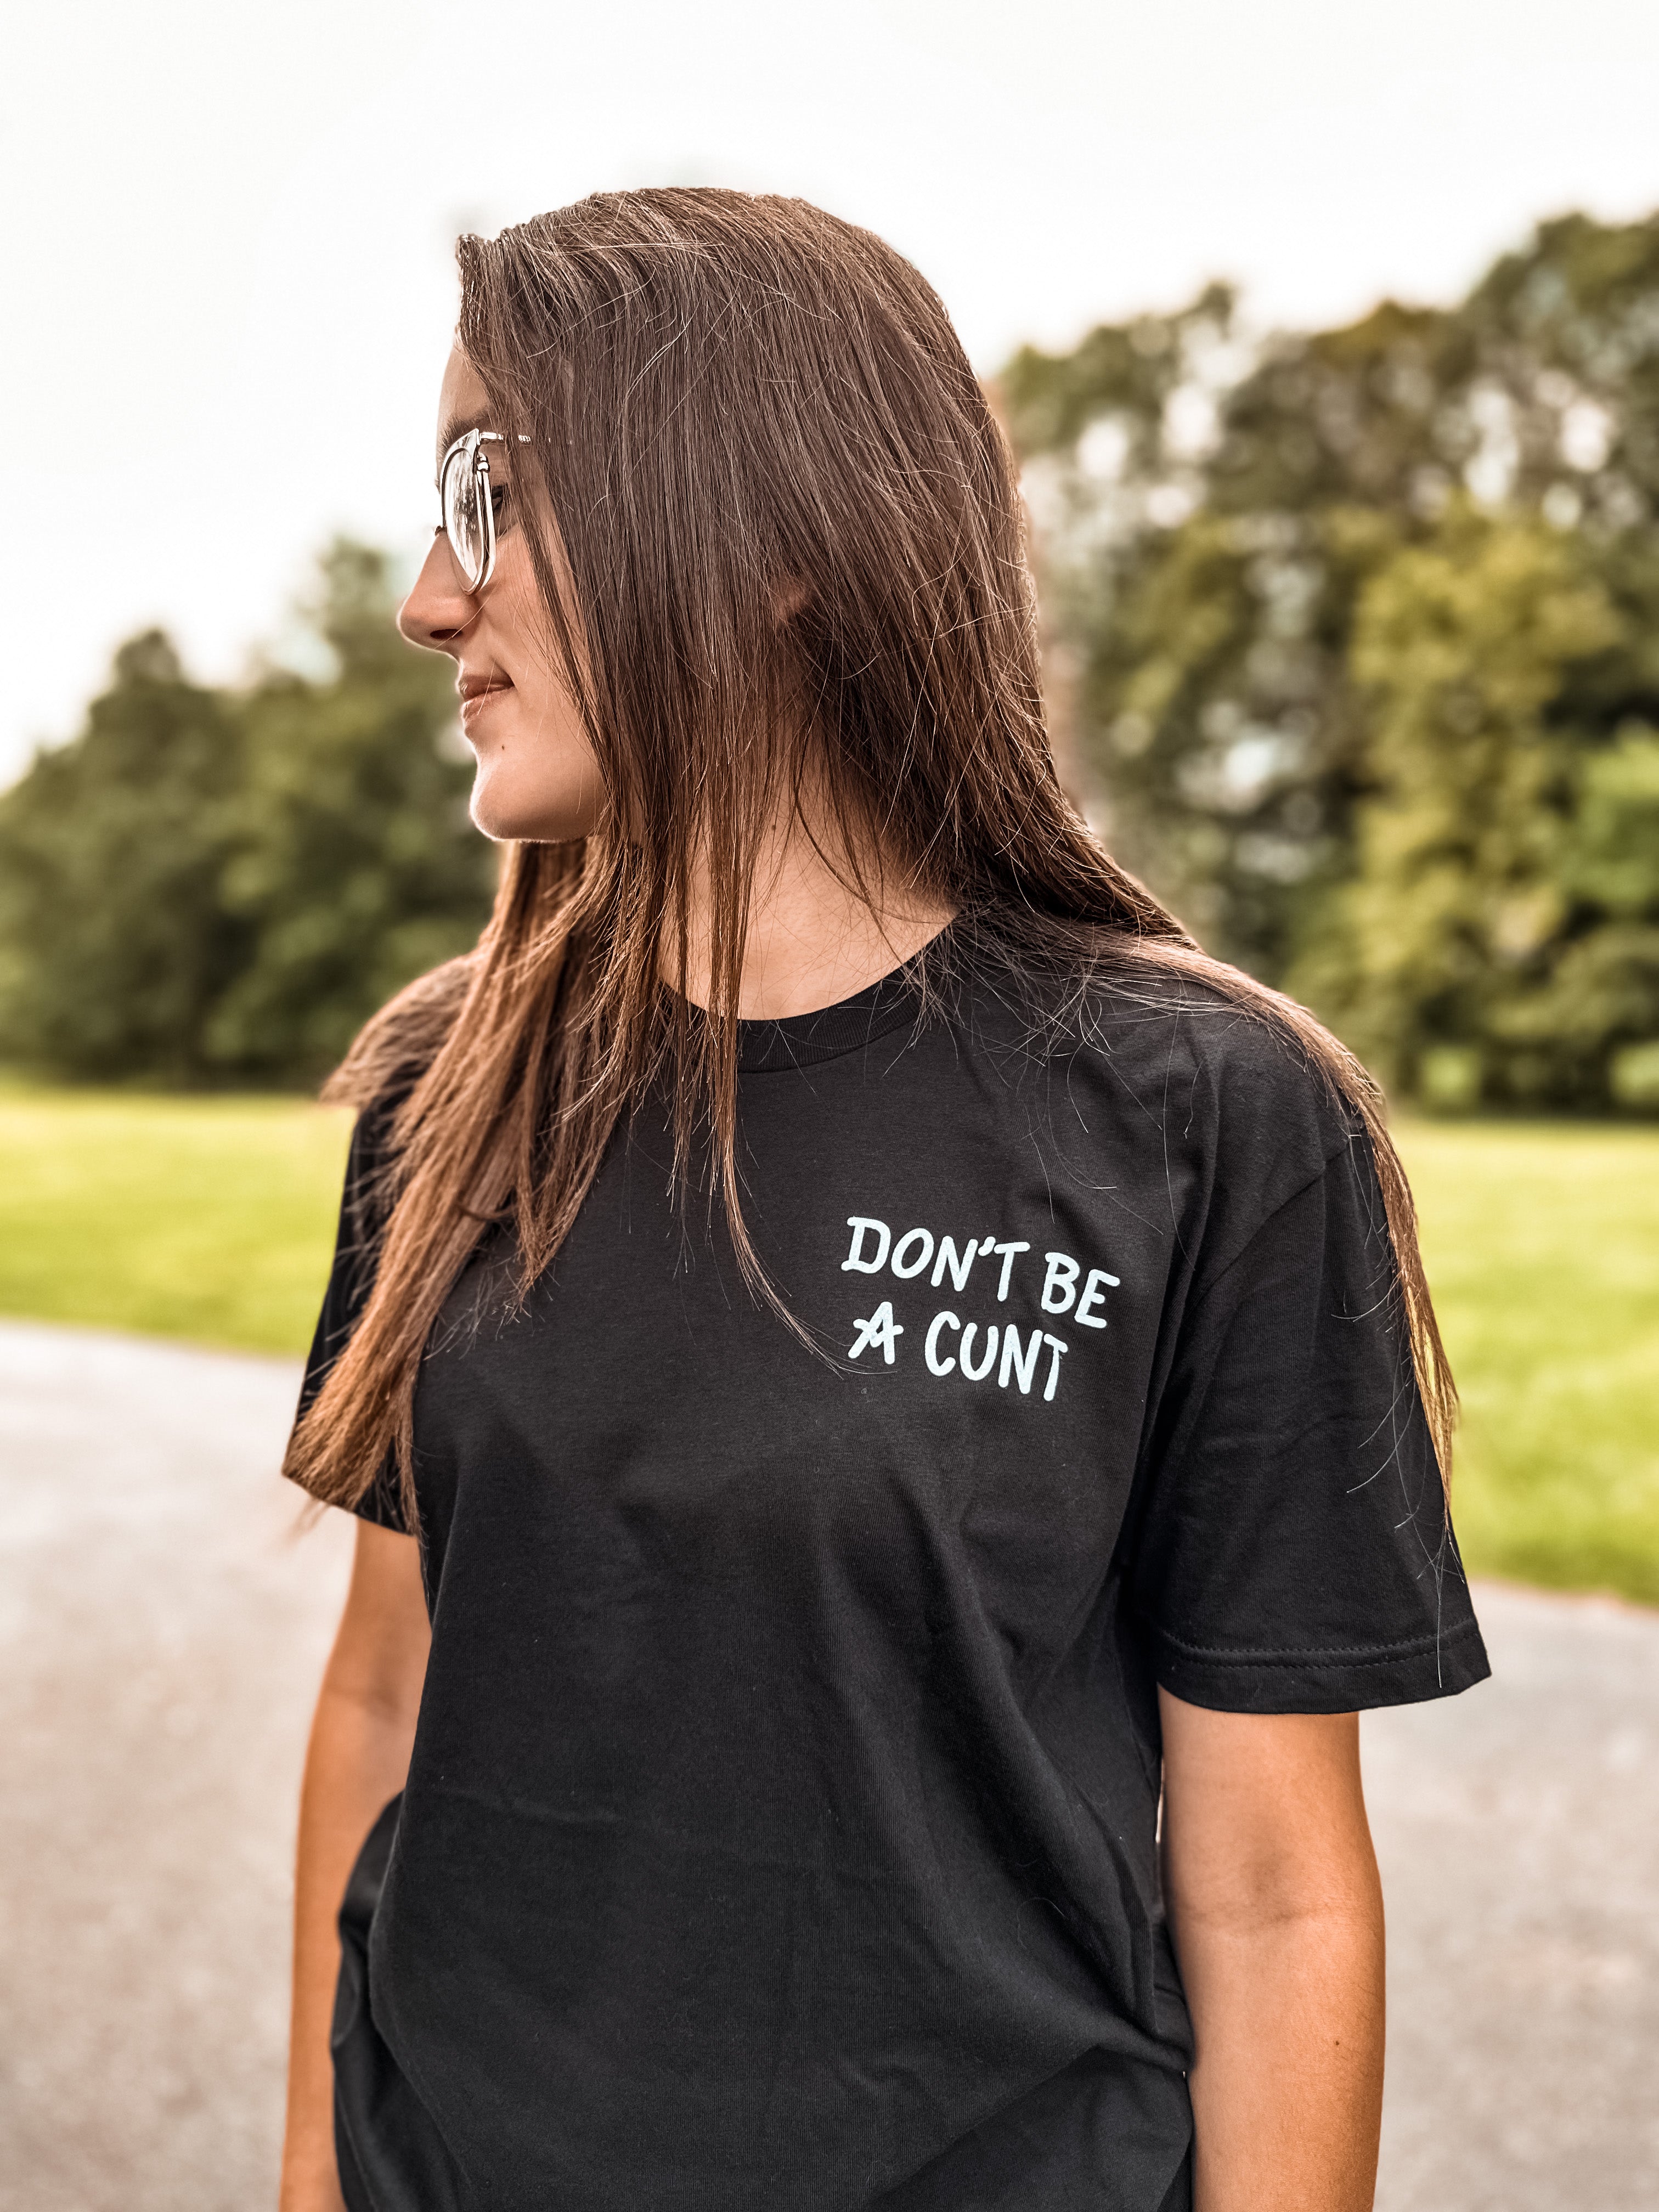 Don’t Be a C*nt! T-Shirt